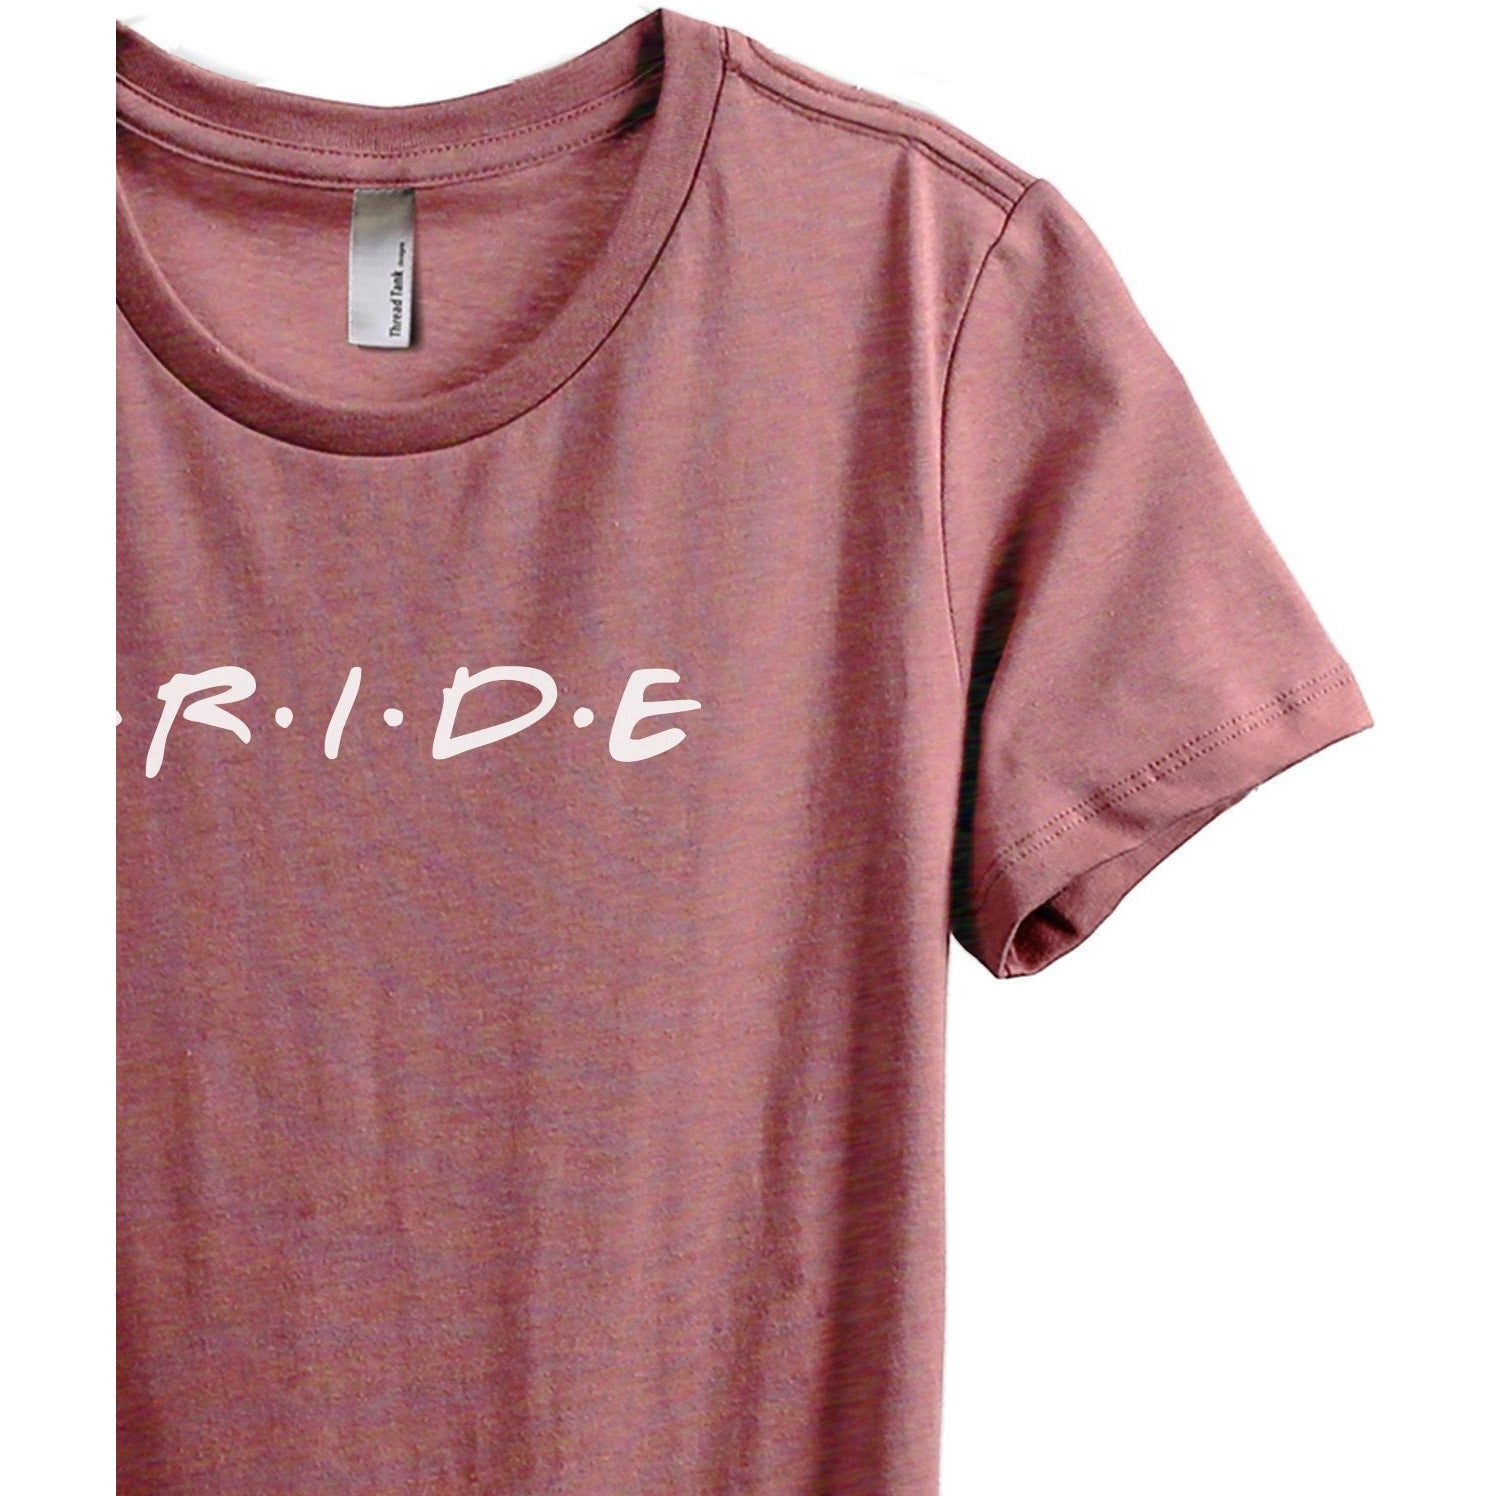 Bride Friends Women's Relaxed Crewneck T-Shirt Top Tee Heather Rouge Zoom Details
